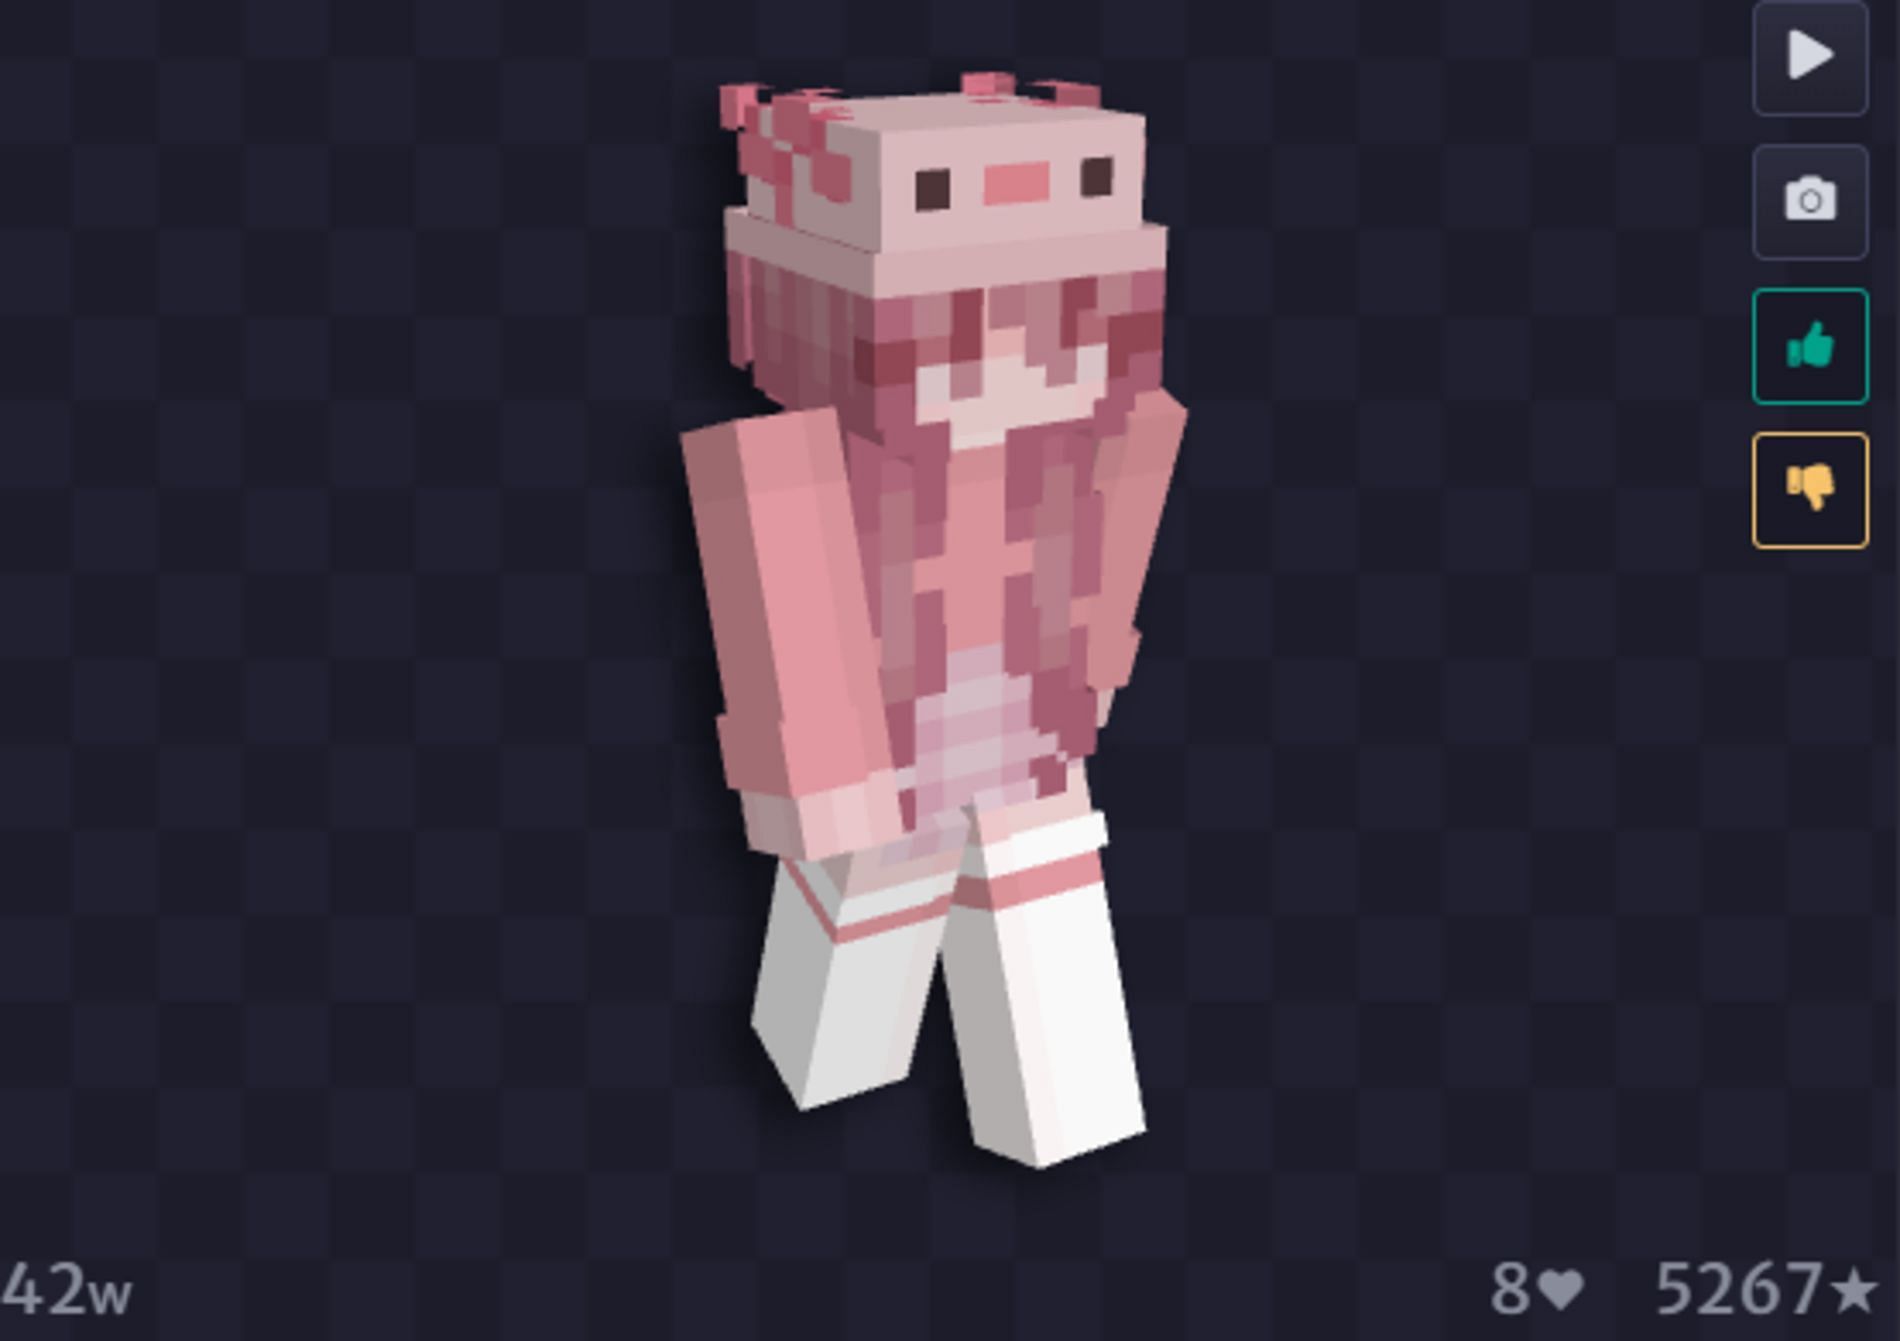 Axolotls are beloved in Minecraft, and now players can take on their appearance in a themed outfit (Image via Fearlicia/NameMC)